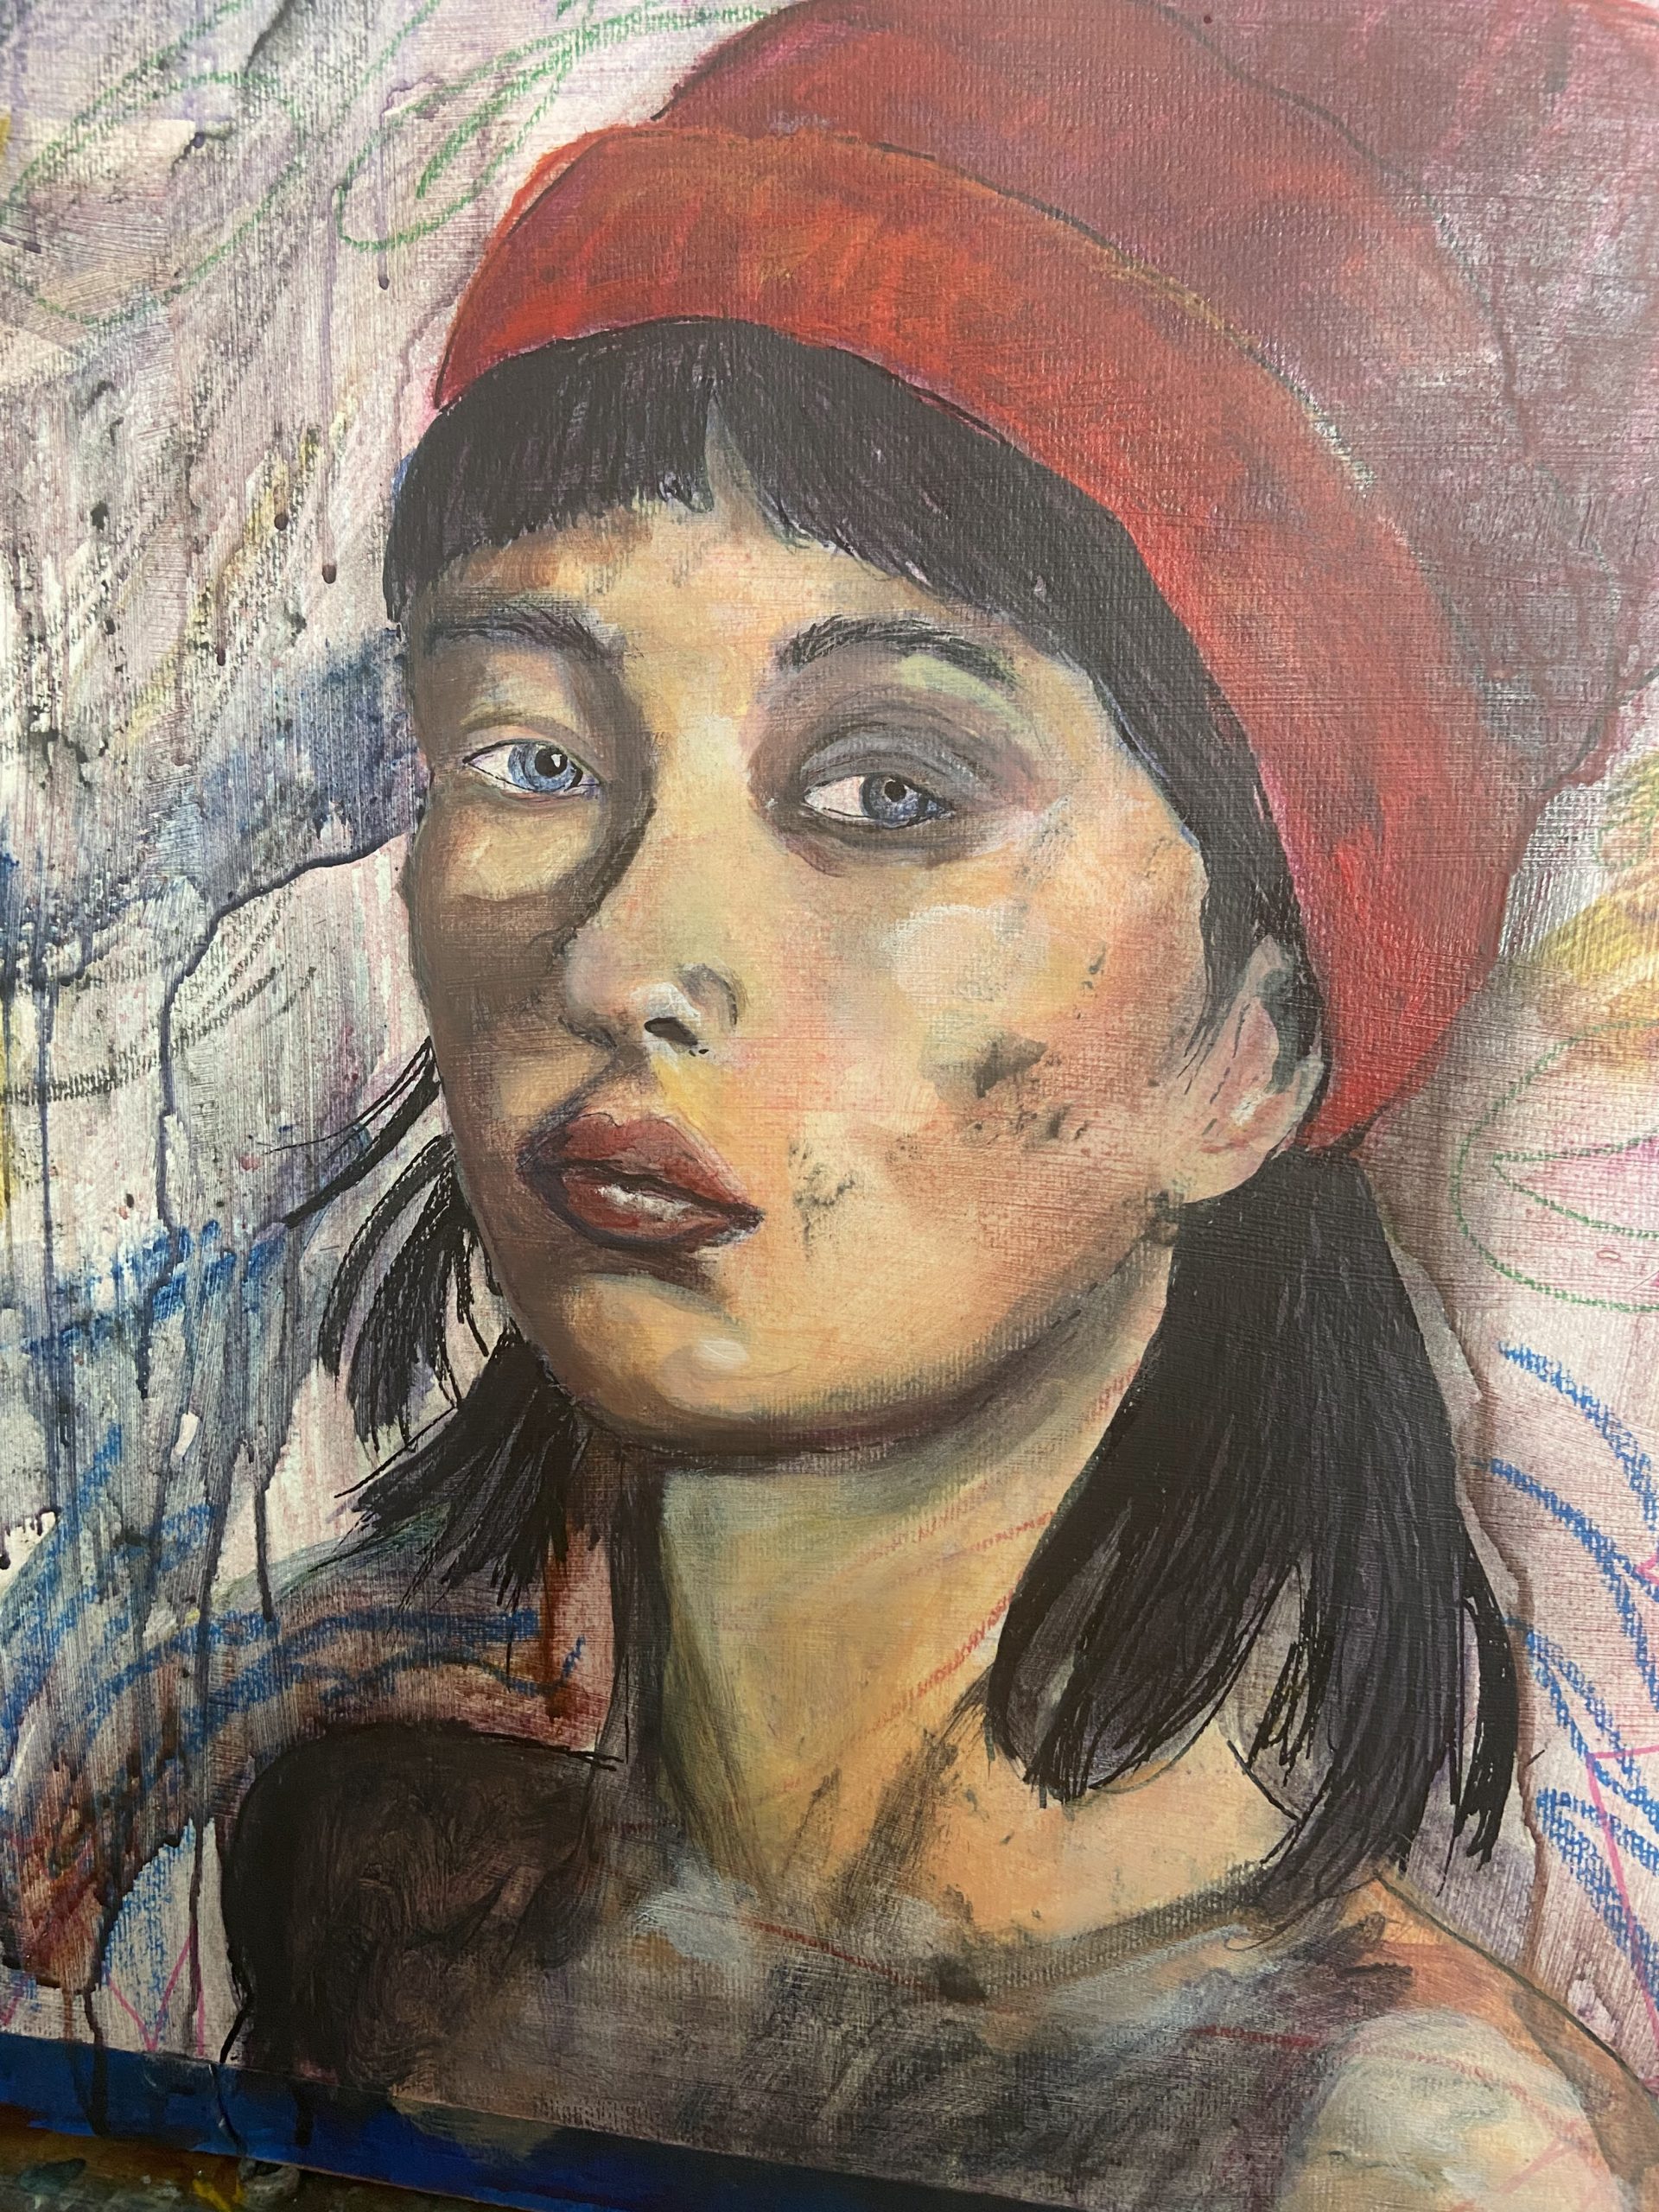 Portrait of a girl wearing a hat, done in a grunge style